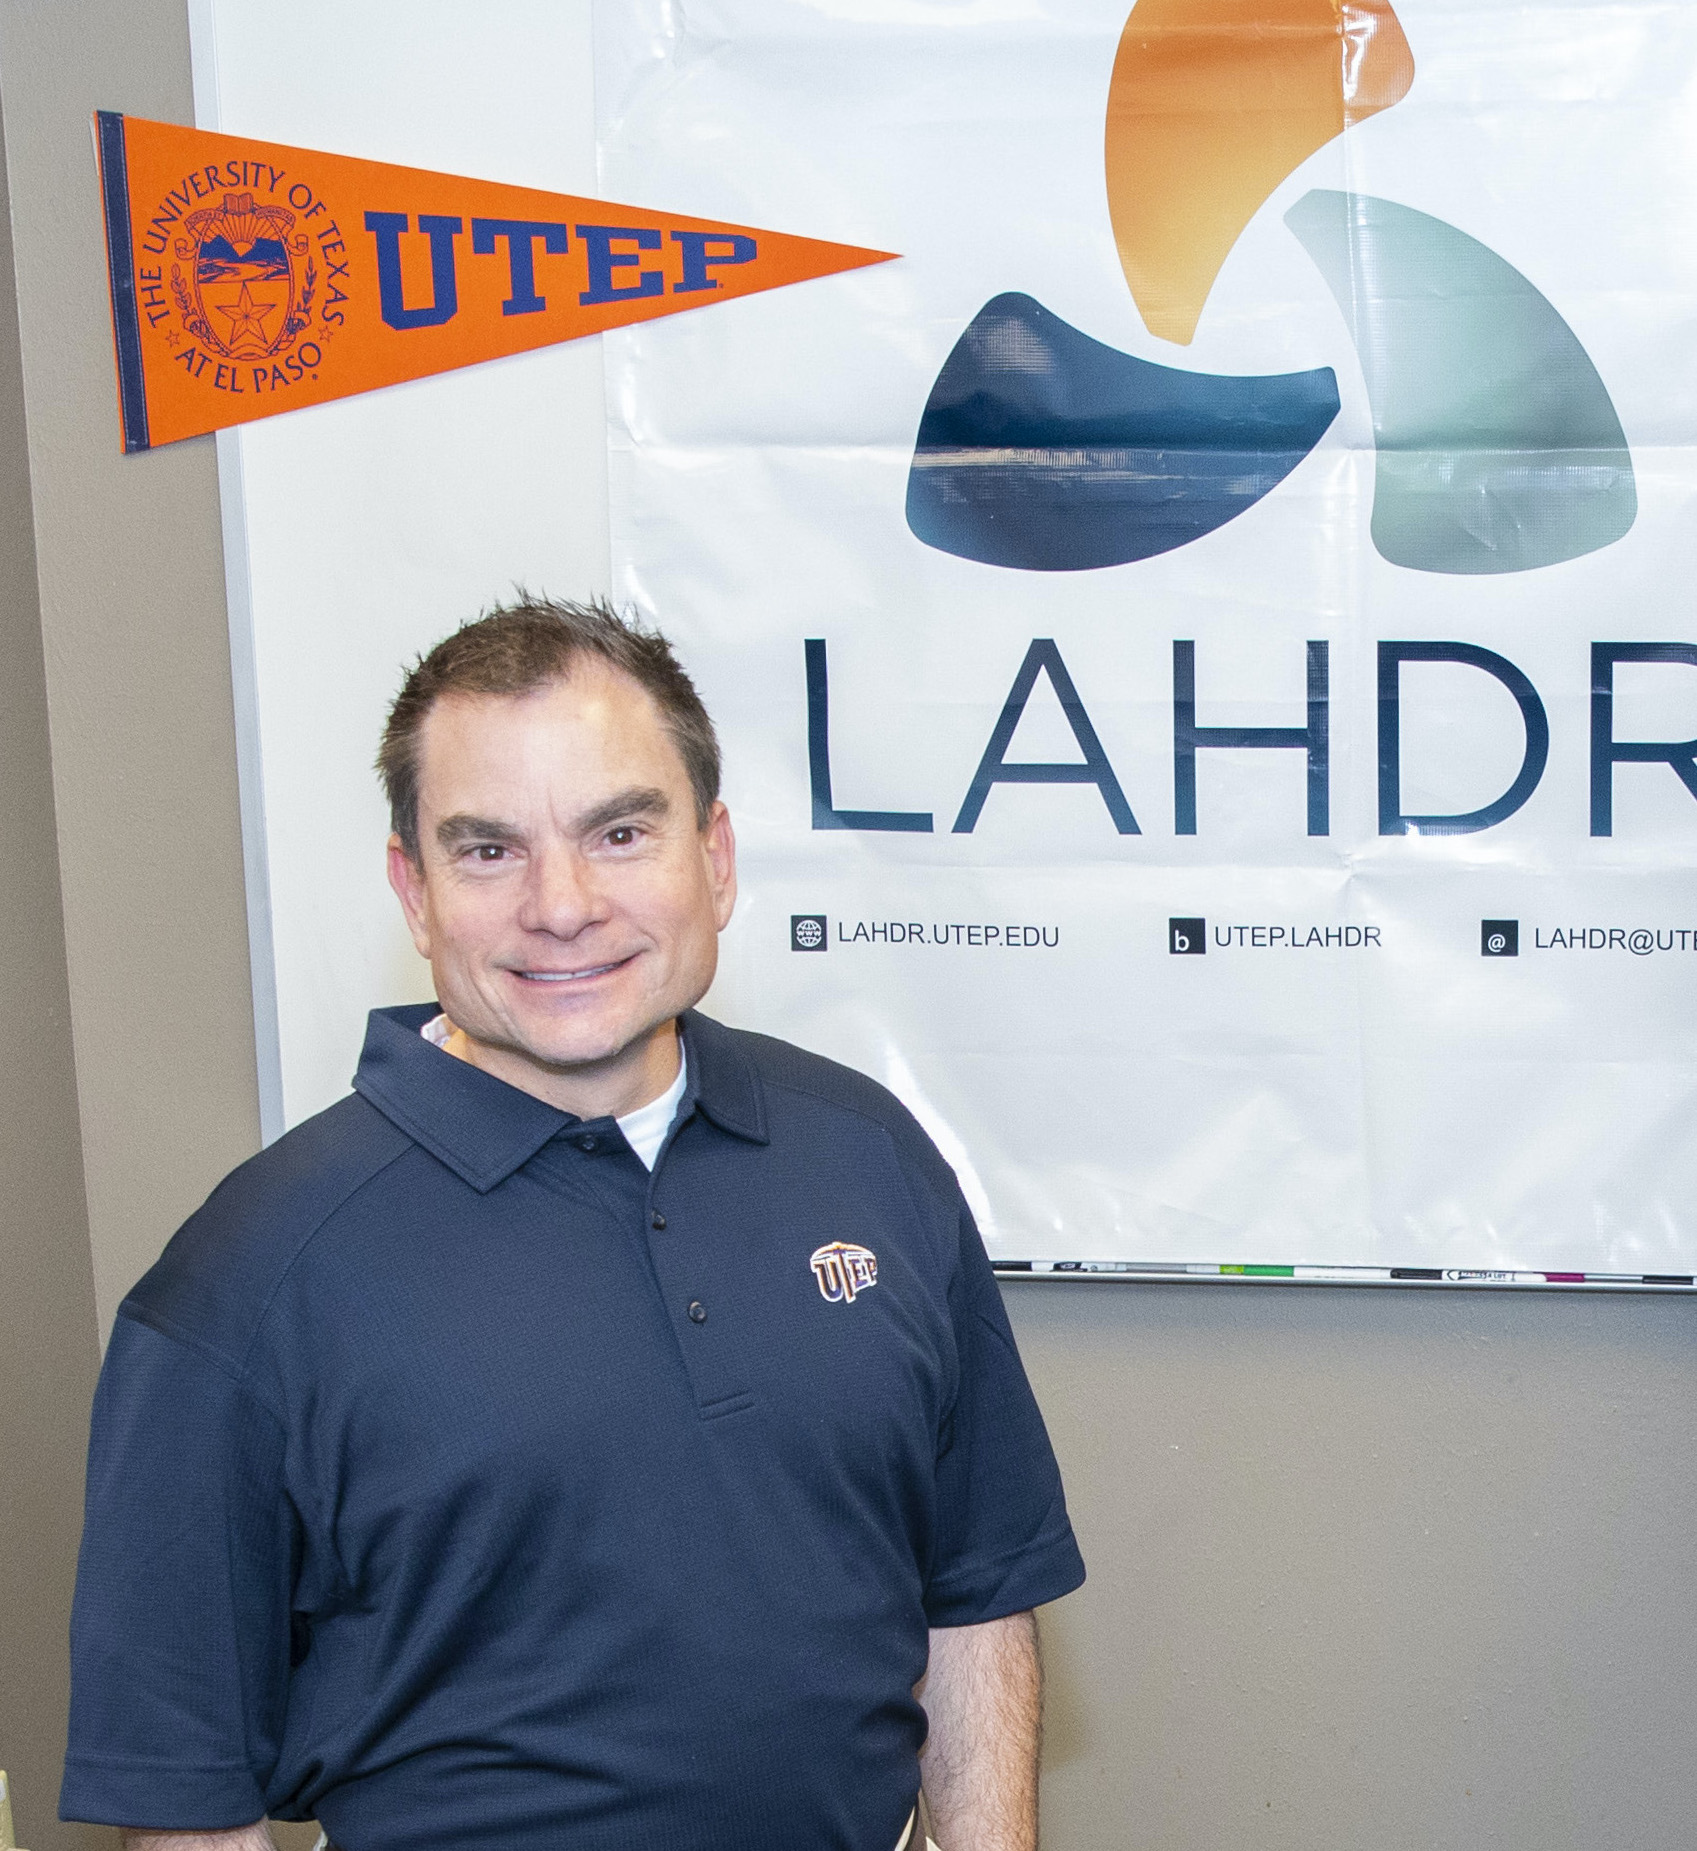 A cohort of faculty, staff and students who are part of UTEP’s Latino Alcohol and Health Disparities Research (LAHDR) and Training Center plan are launching a new self-funded research effort, called CAMBIOS, in April 2020 that will focus on successful changes among heavy drinkers that may include abstinence. They are led by Craig Field, Ph.D., professor of psychology. Photo: Ivan Pierre Aguirre / UTEP Communications 